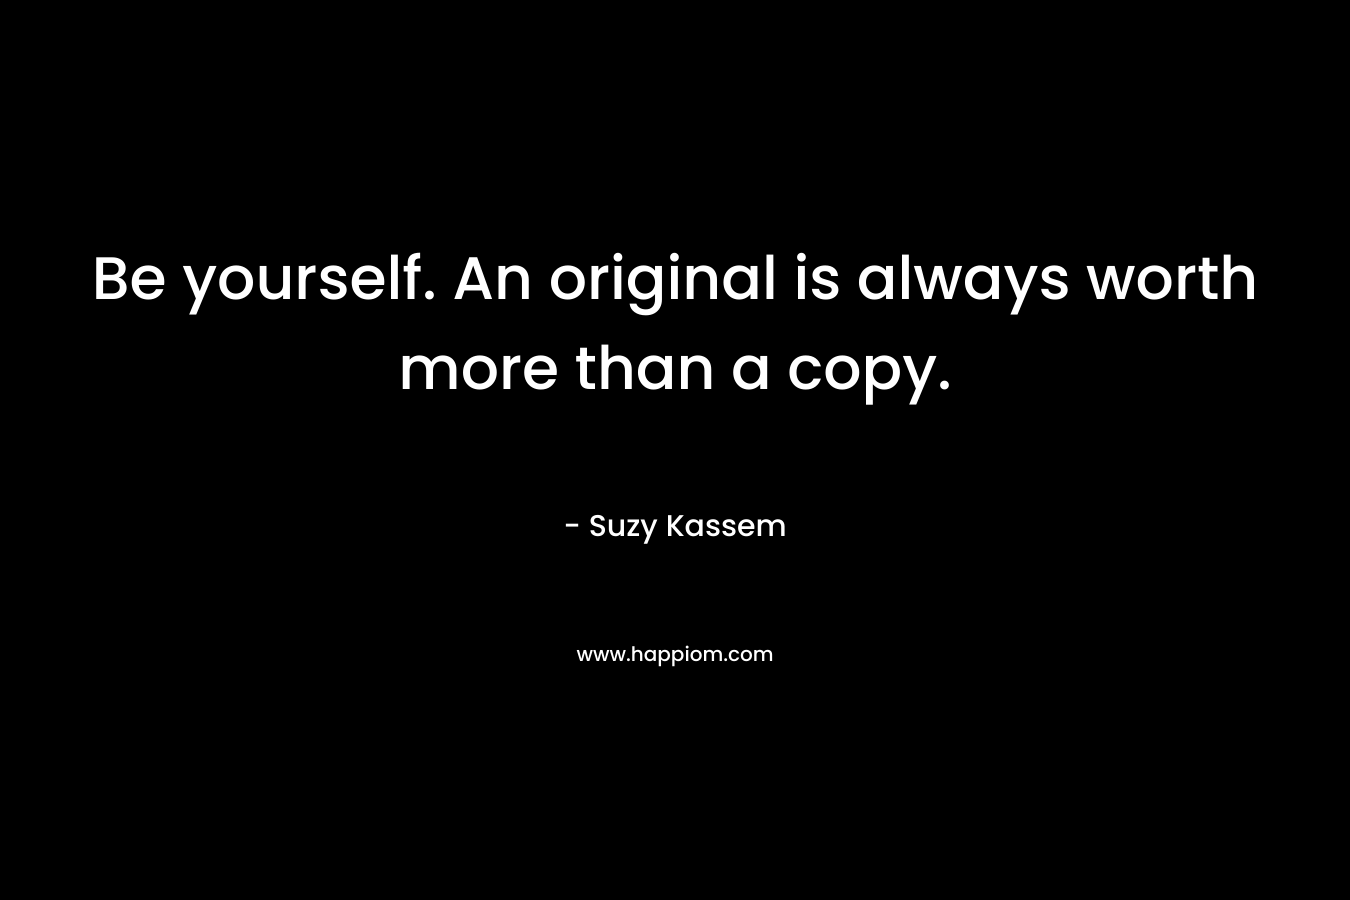 Be yourself. An original is always worth more than a copy.